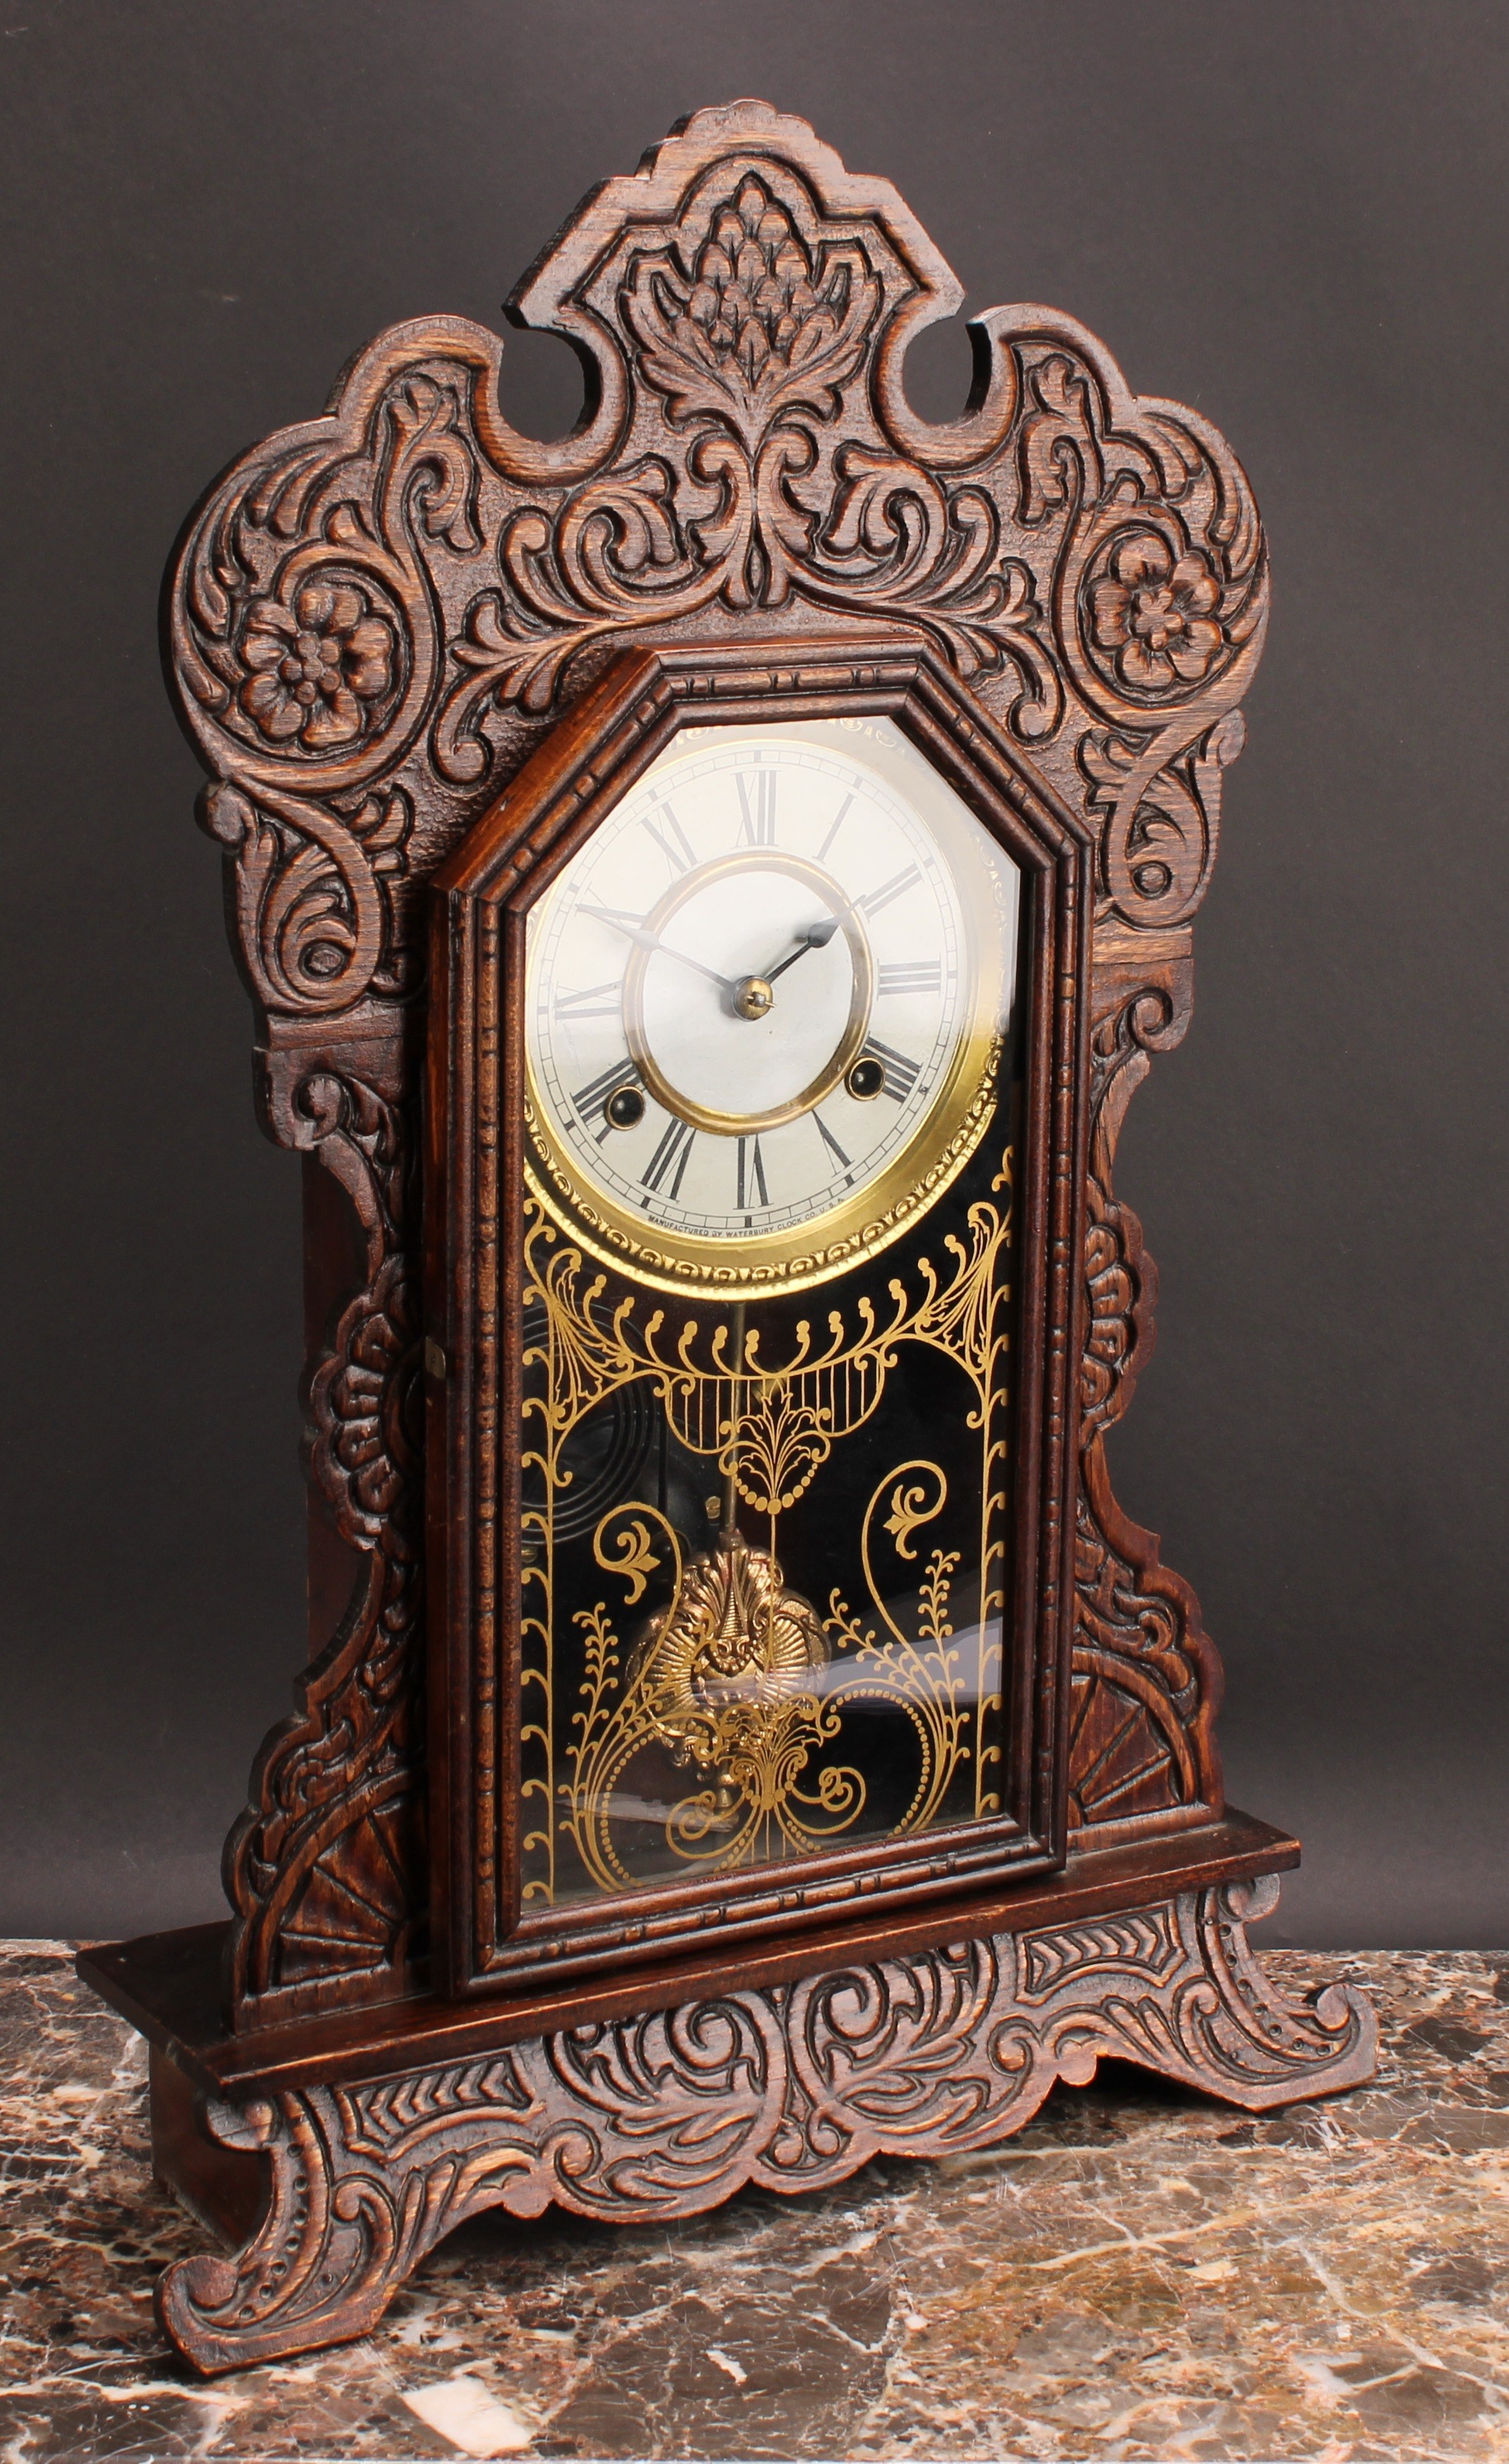 A 19th century American 'gingerbread' shelf clock, by Waterbury Clock Co, 13cm painted dial - Image 2 of 2